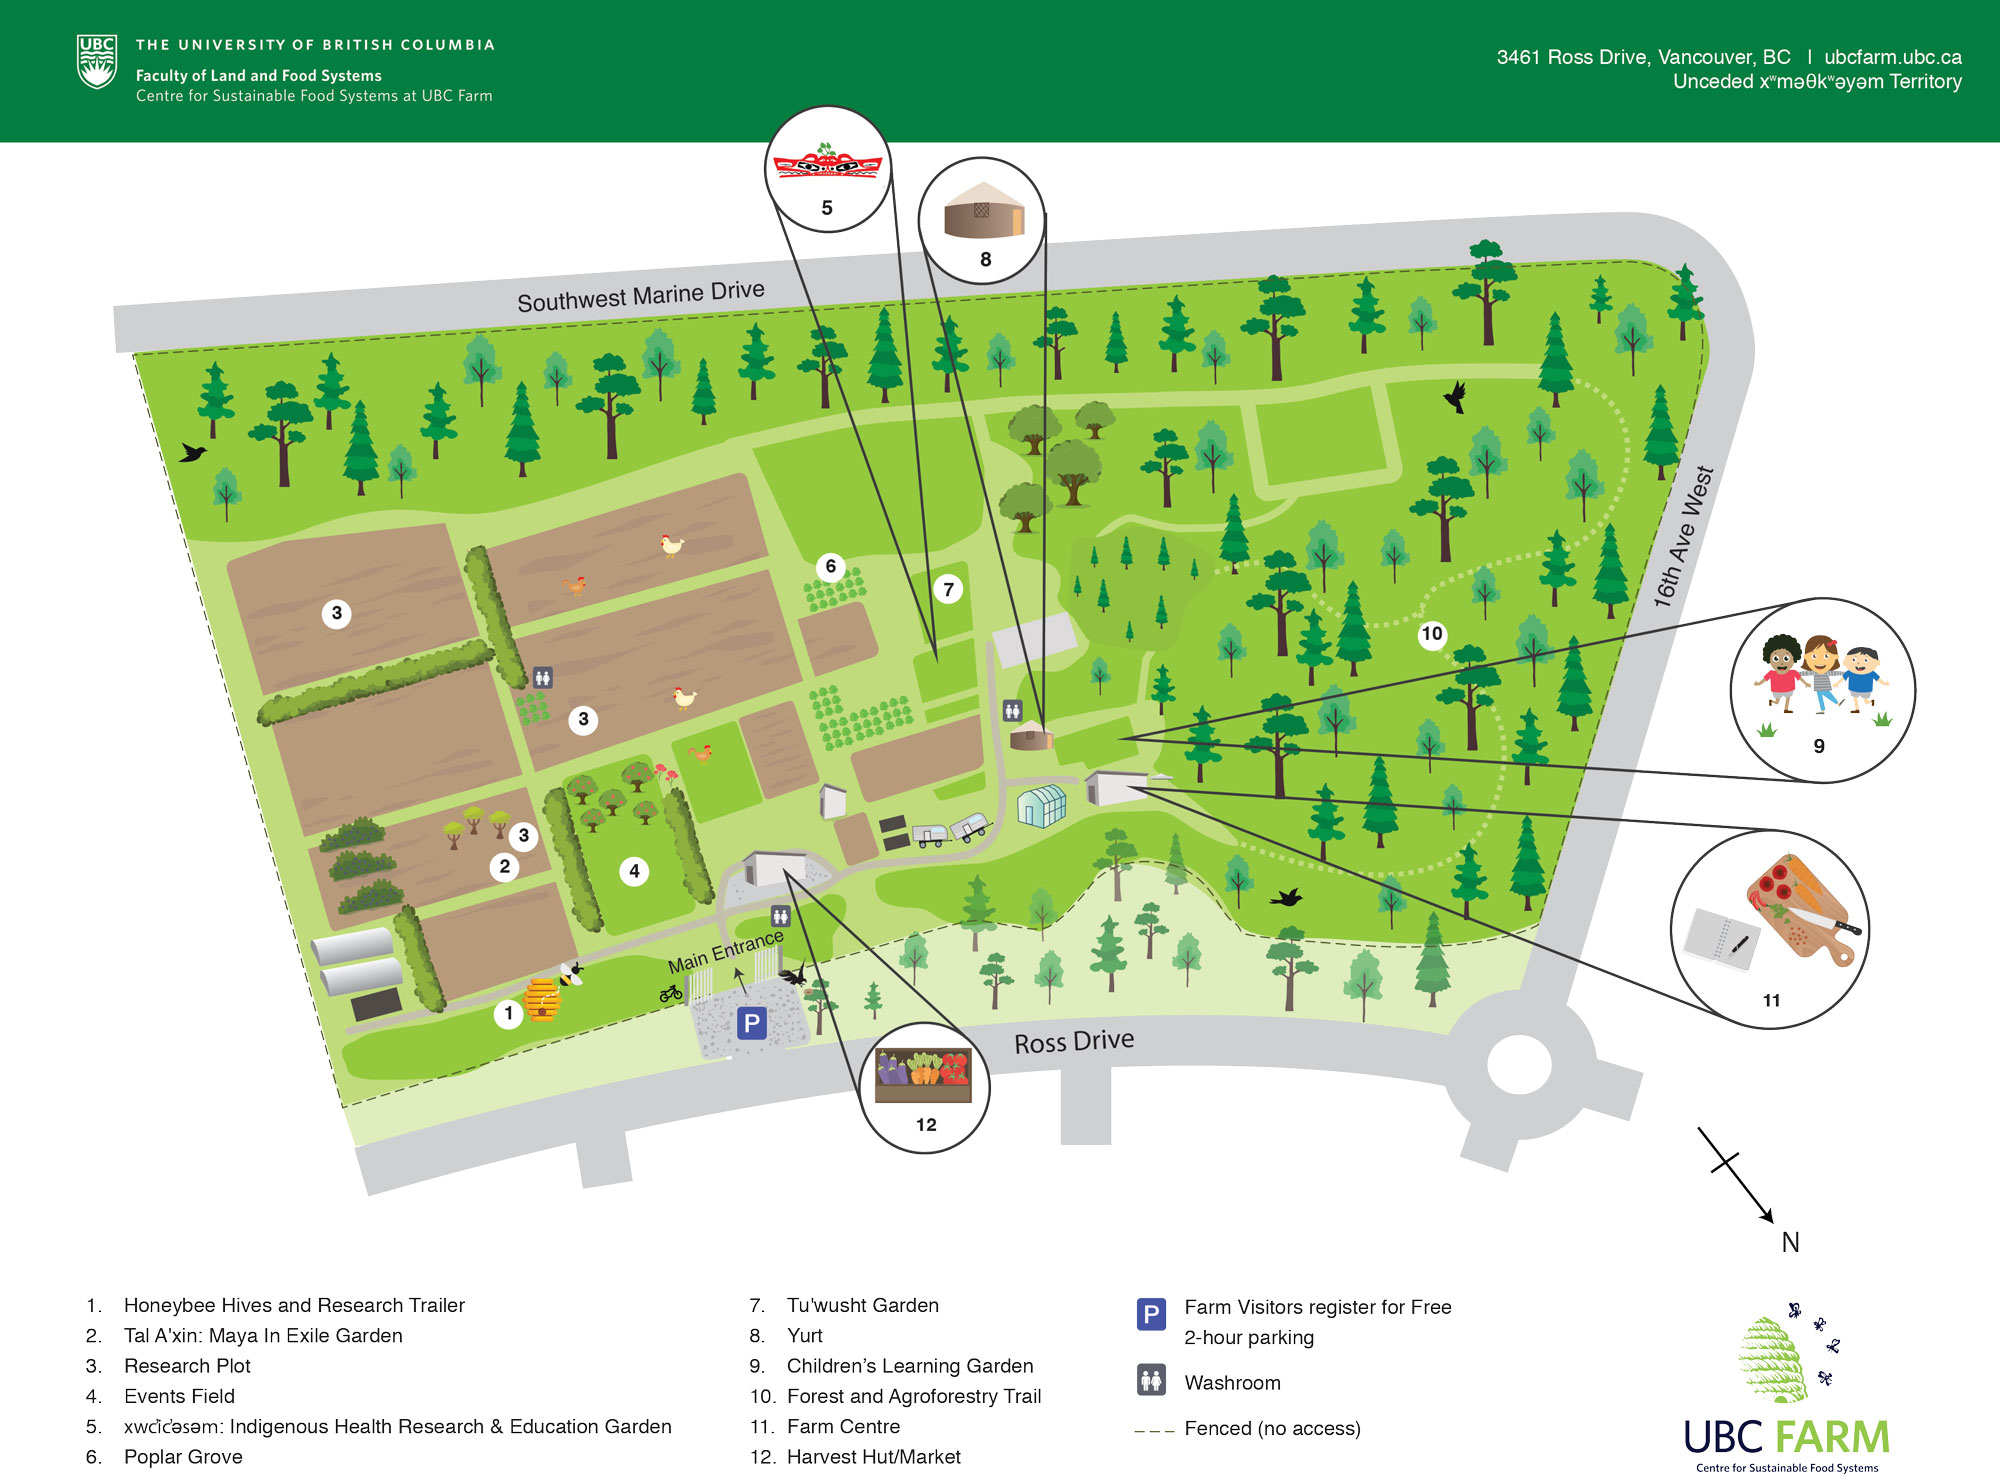 A map of the UBC Farm.